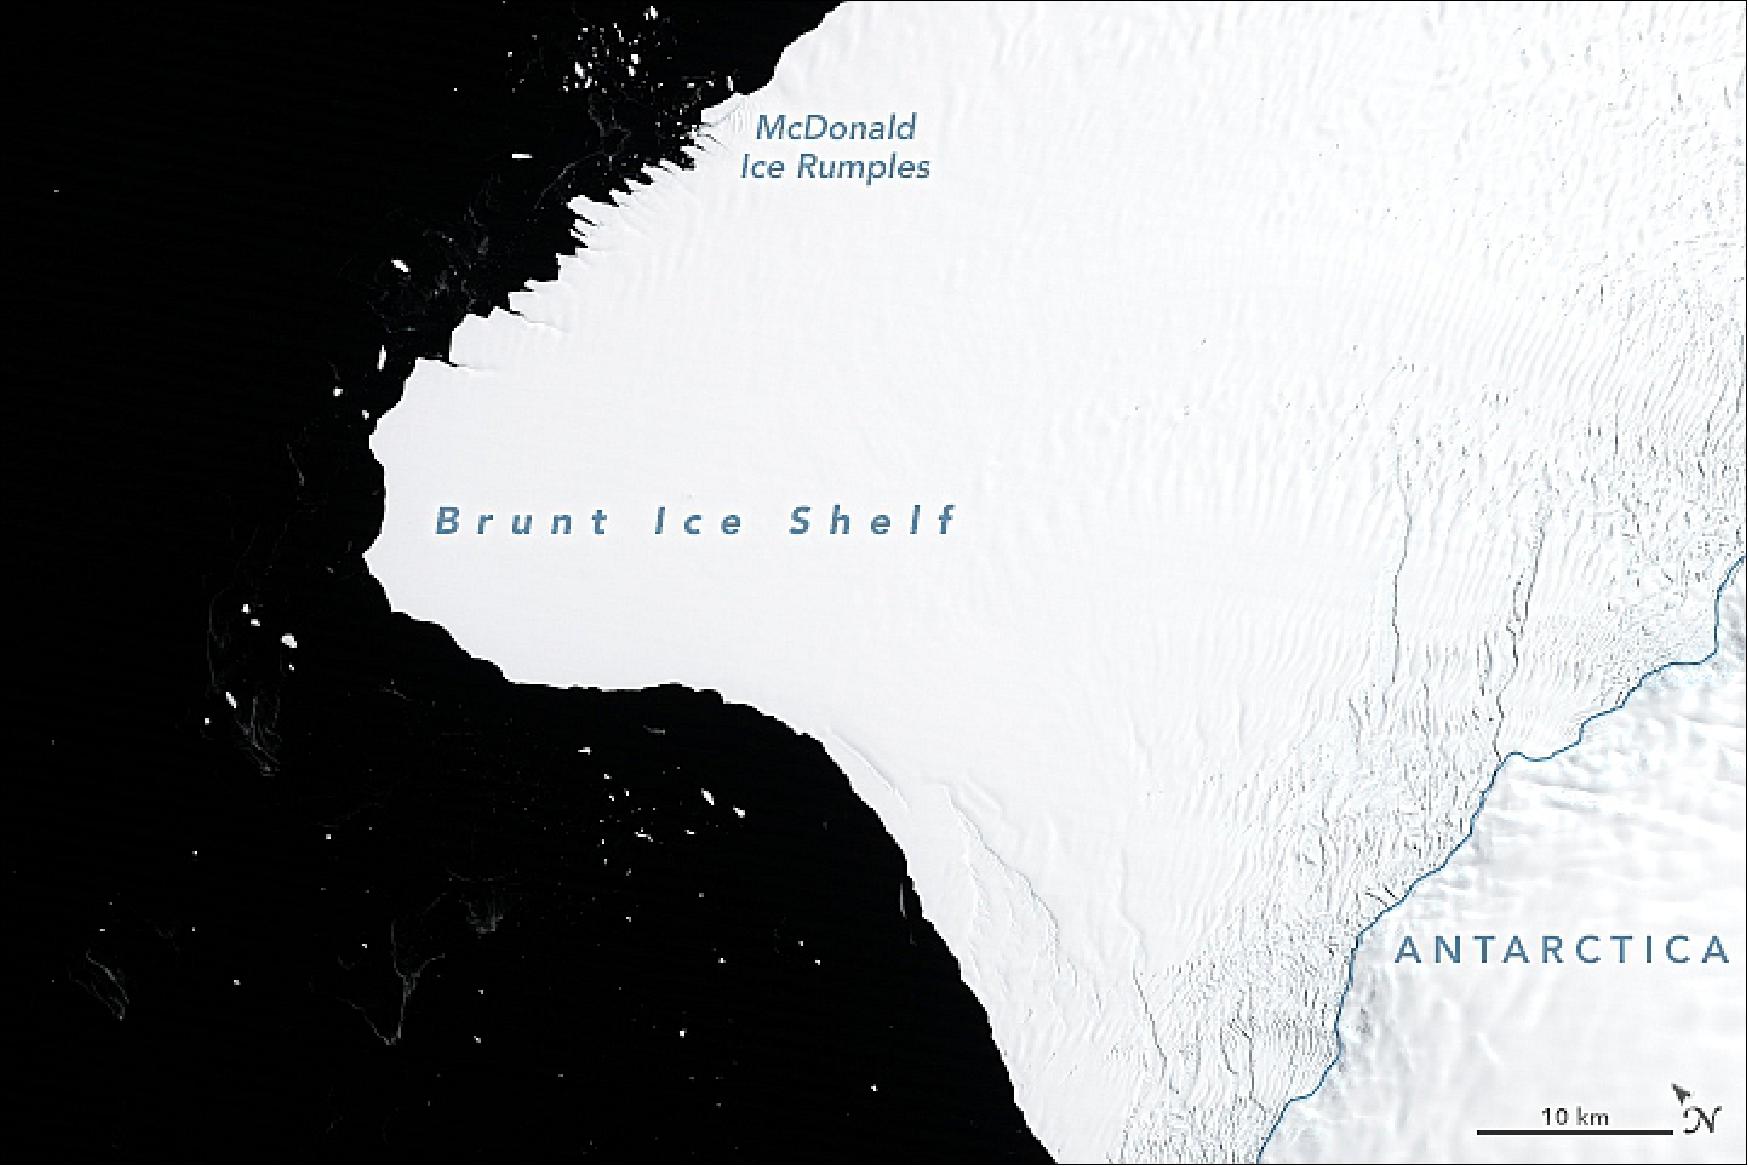 Figure 107: Antarctica's Brunt Ice Shelf acquired with the Thematic Mapper (TM) on Landsat-5 on 30 January 1986 (image credit: NASA Earth Observatory image by Joshua Stevens, using Landsat data from the U.S. Geological Survey. Story by Kathryn Hansen, with image interpretation by Chris Shuman)